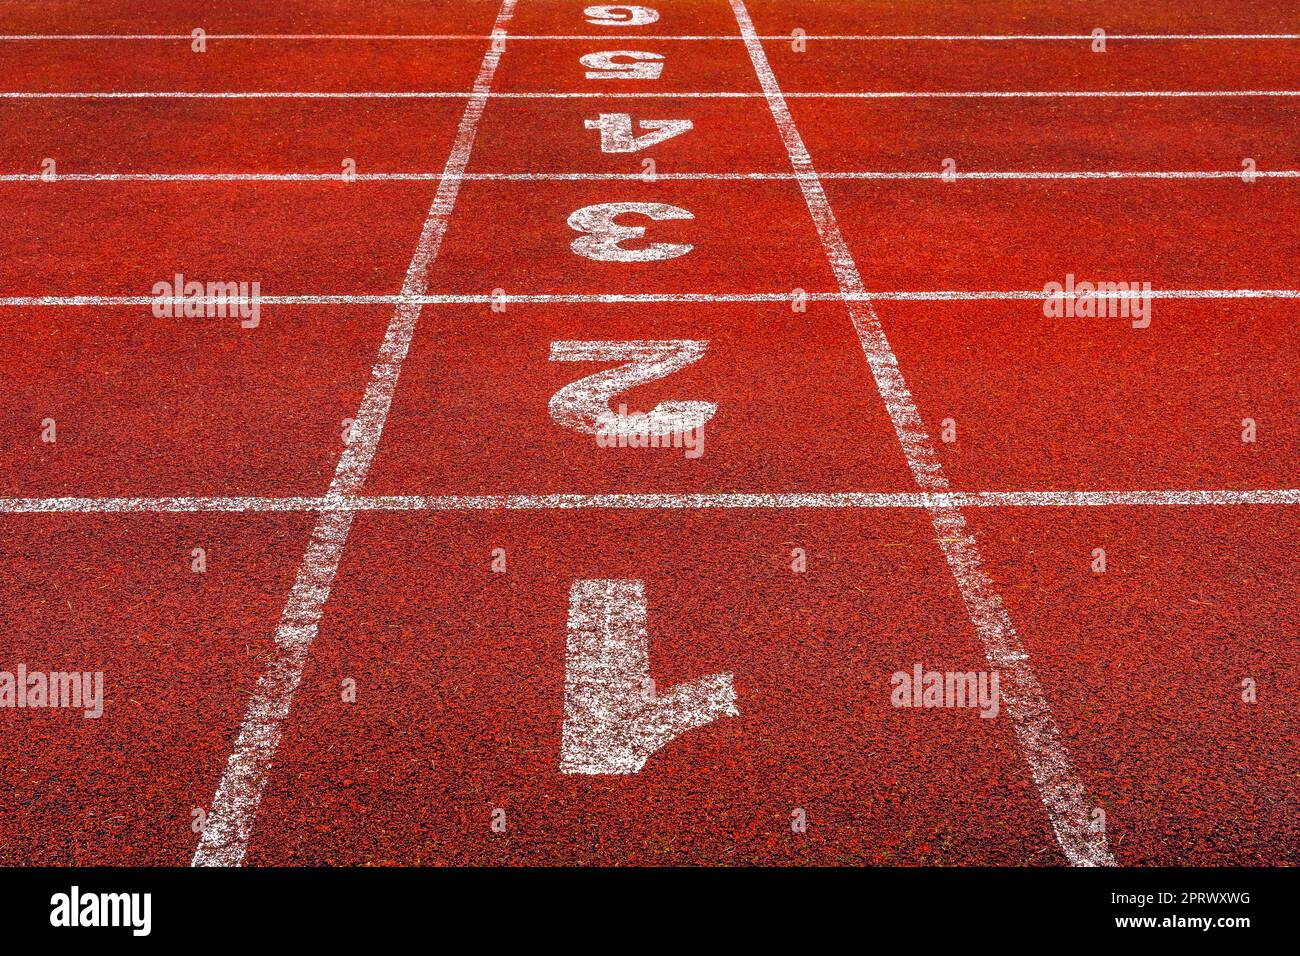 Start points with numbers from one to six on running track Stock Photo